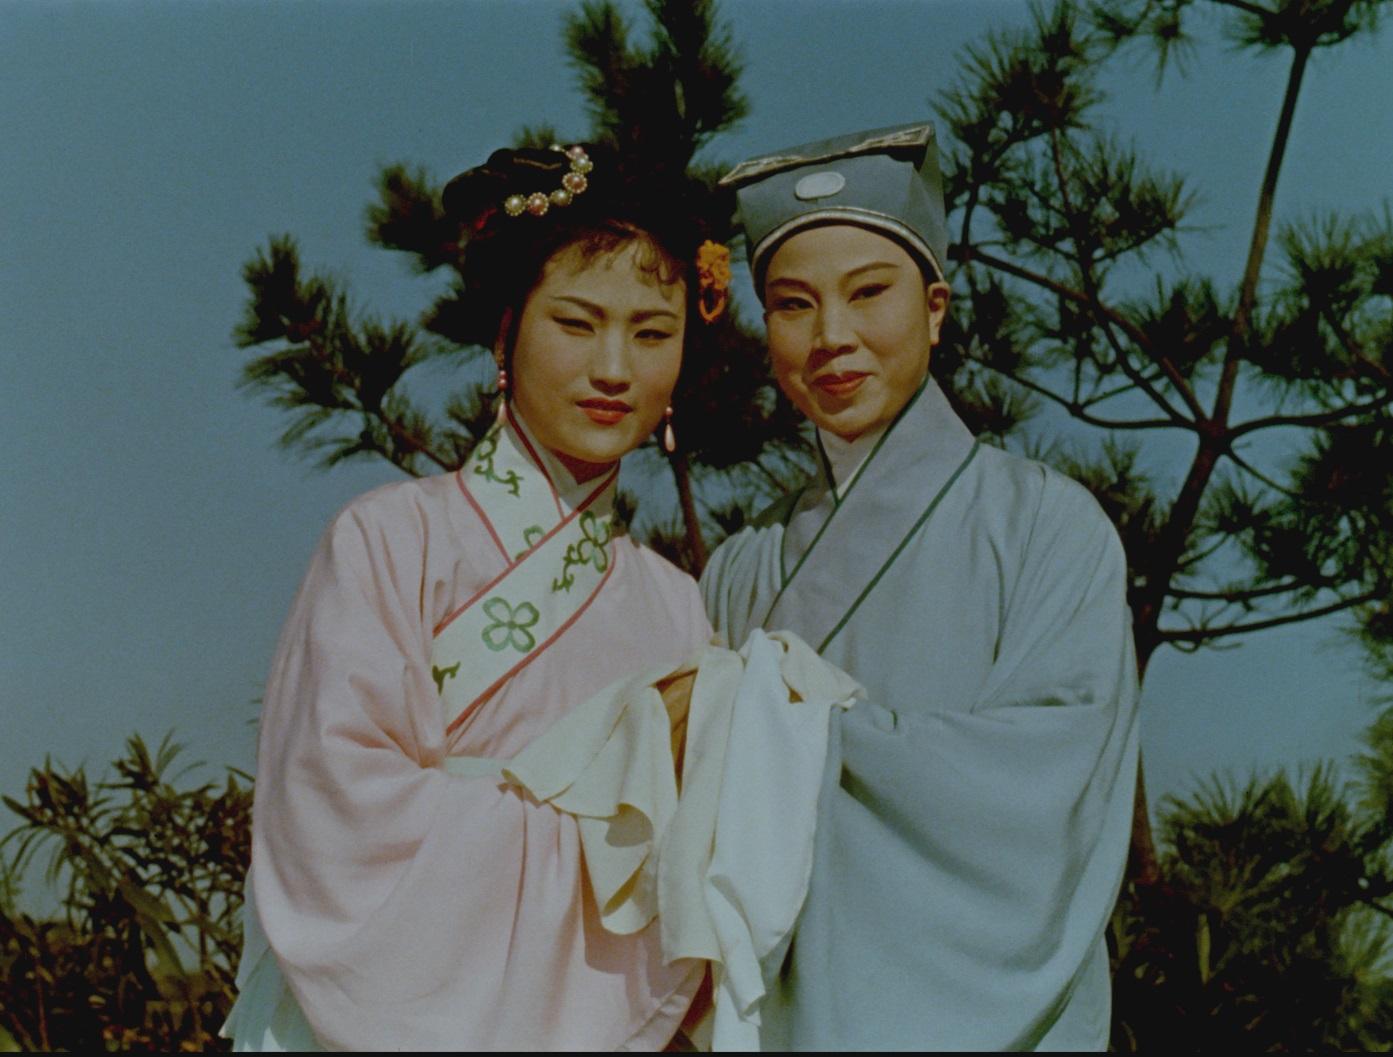 The Chinese Opera Festival 2023 will screen eight selected classic opera films in August and September. Photo shows a film still of "Mermaid Legend" (1959).